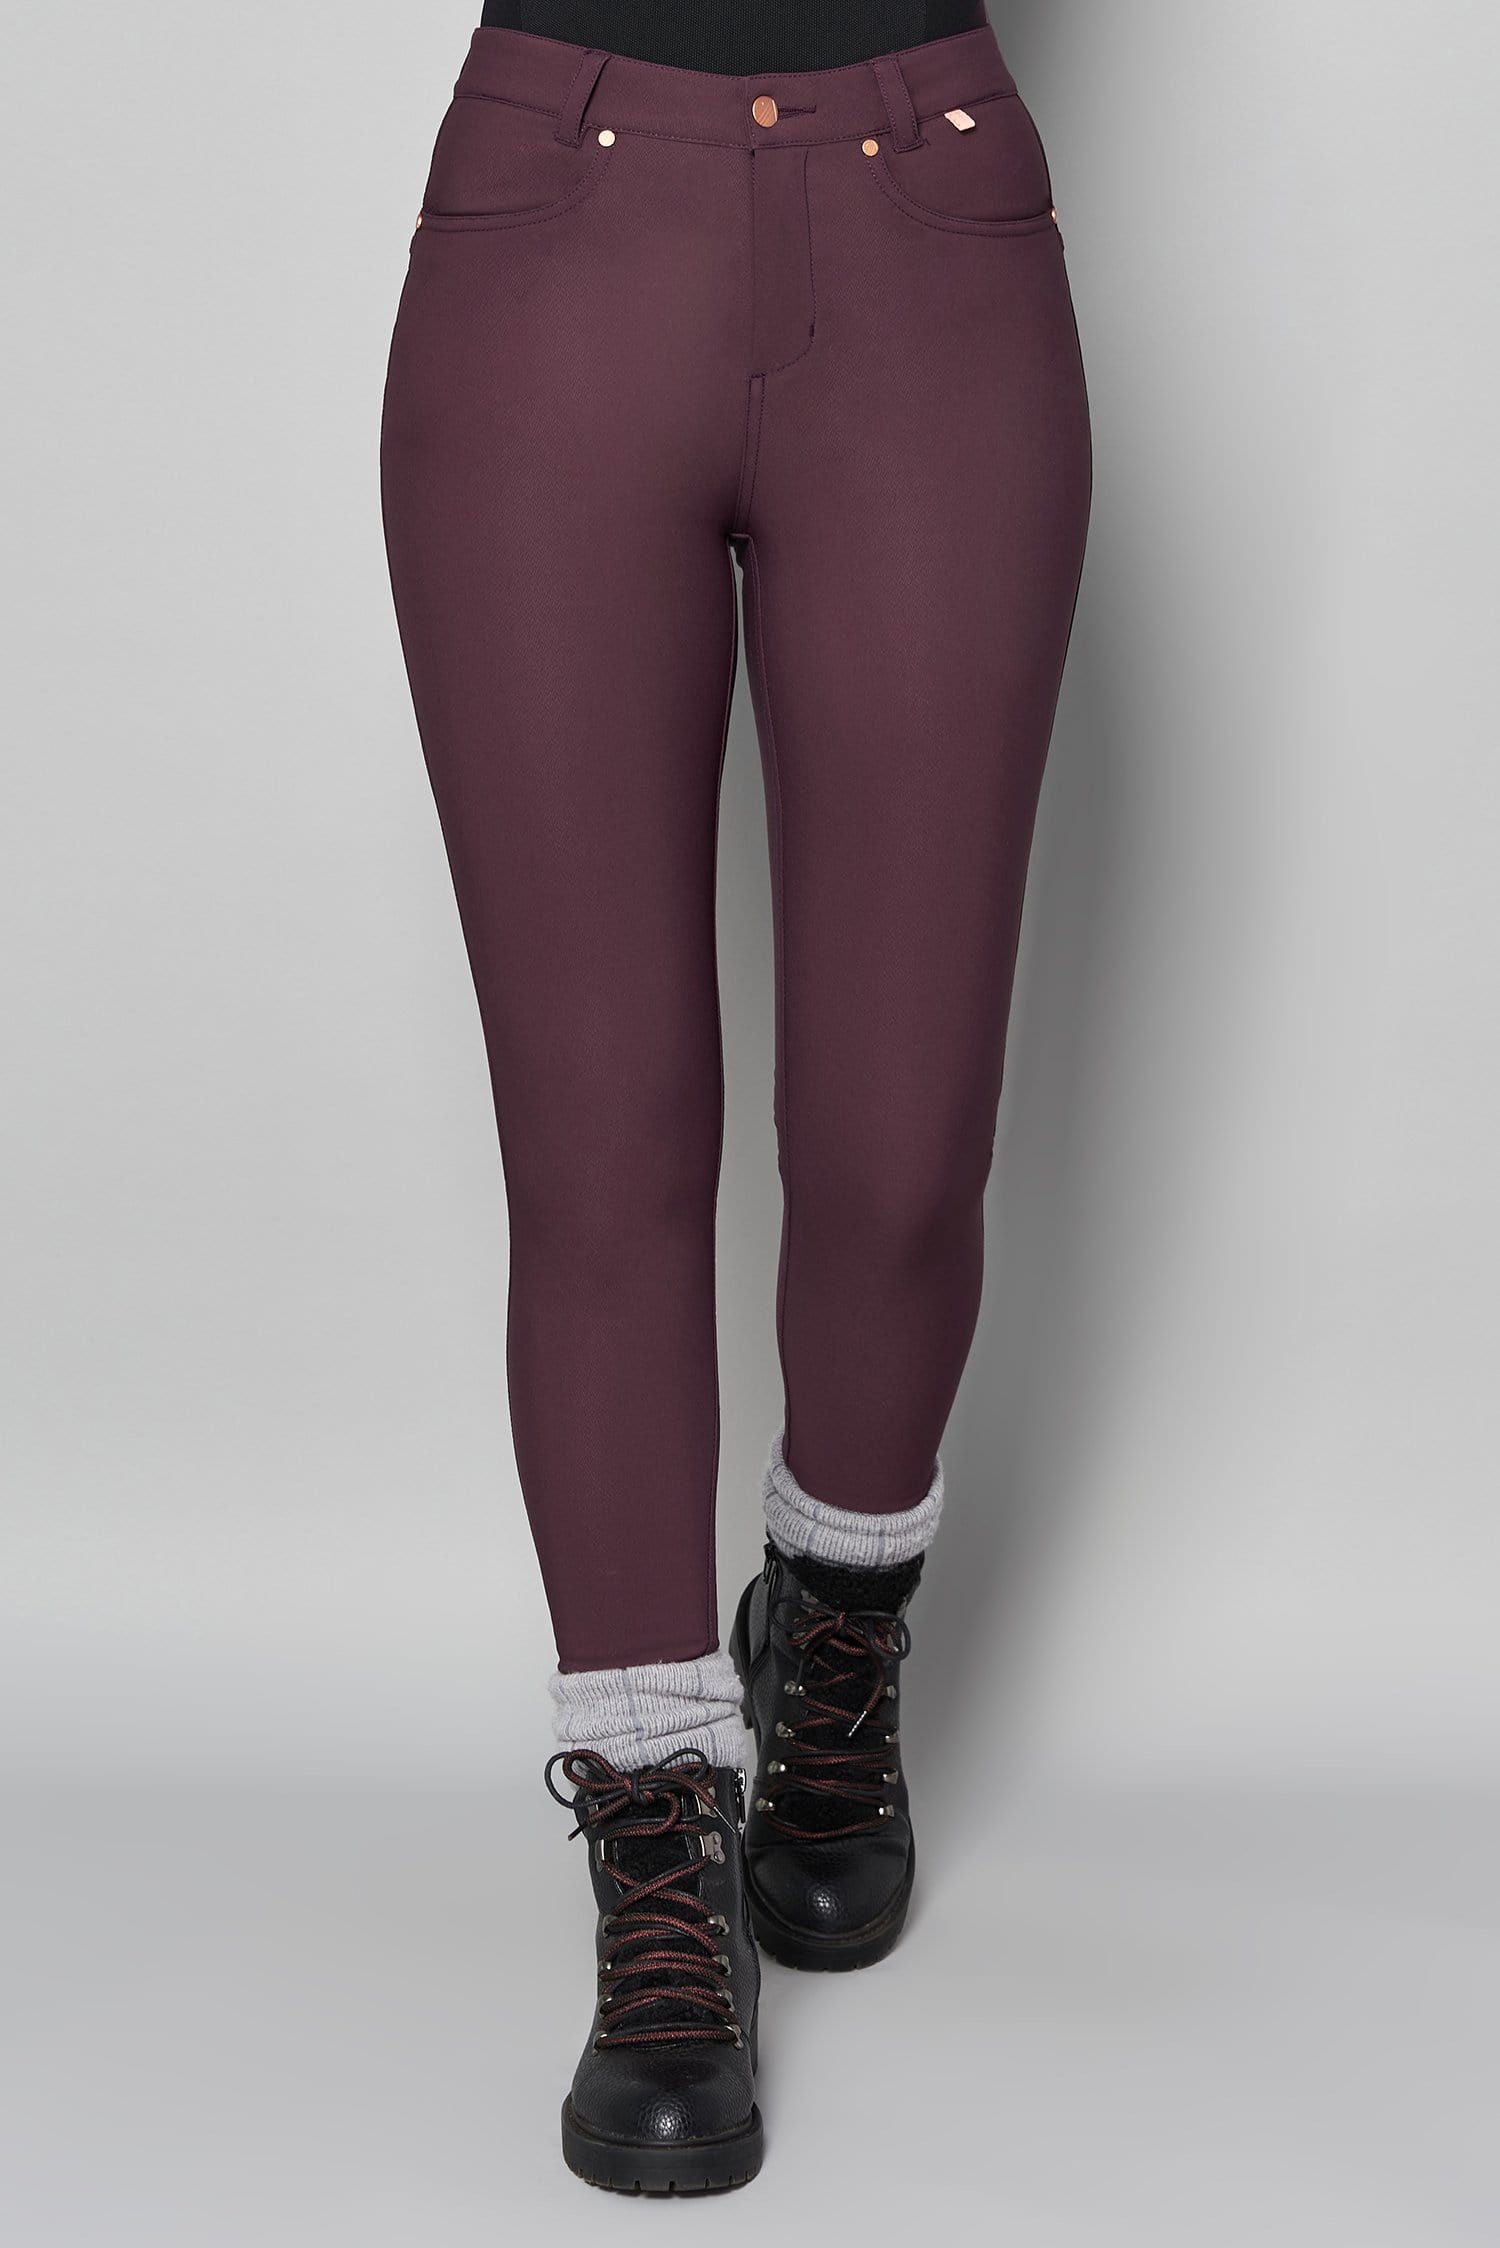 Thermal Skinny Outdoor Trousers - Aubergine - 30l / Uk12 - Womens - Acai Outdoorwear